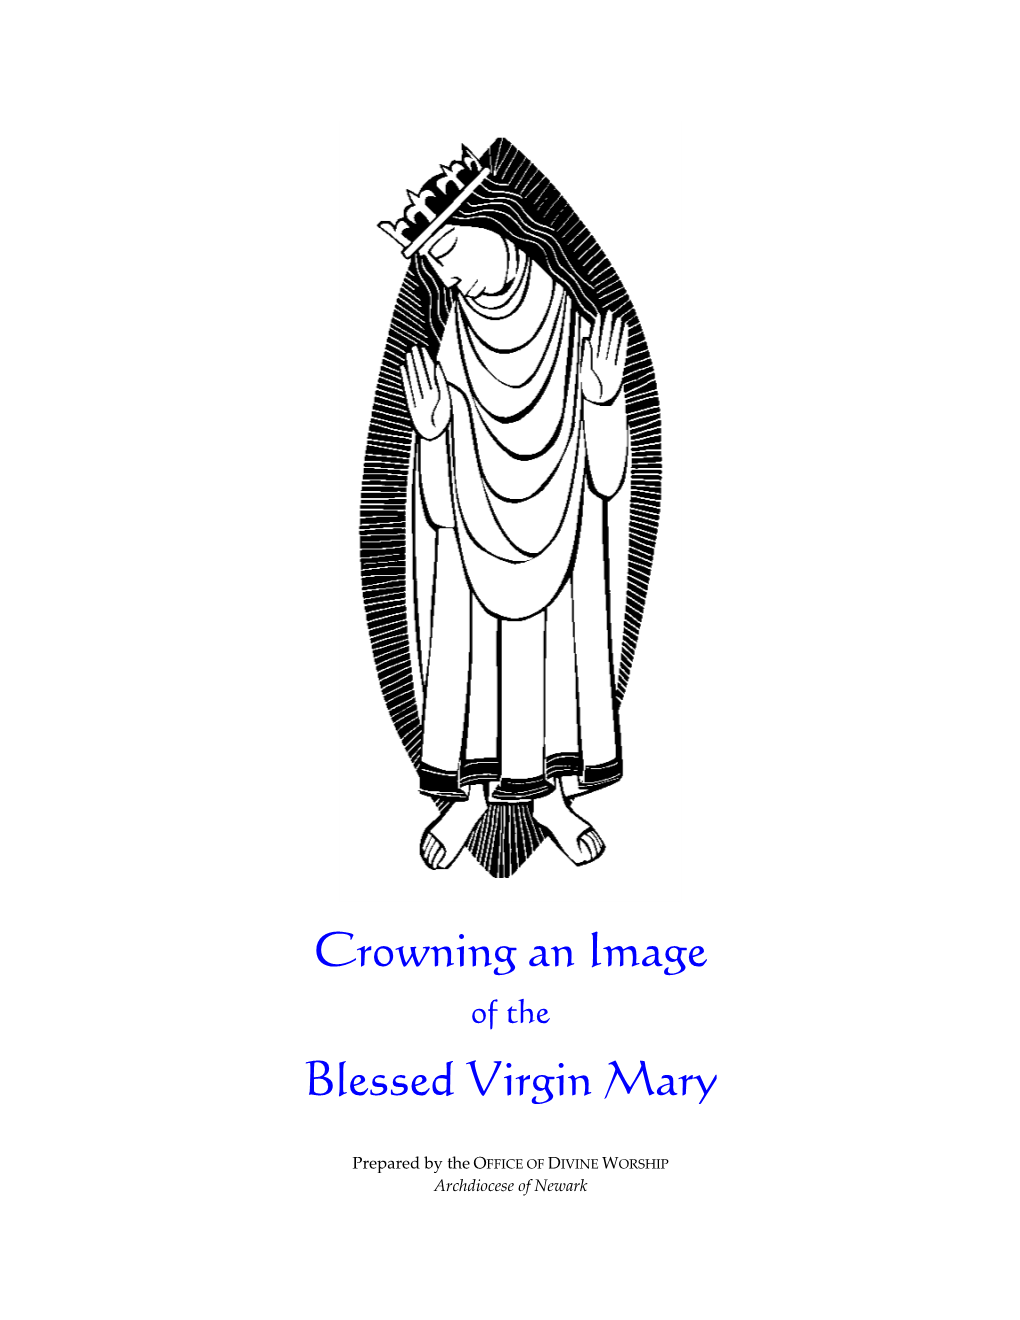 Crowning of Blessed Virgin Mary